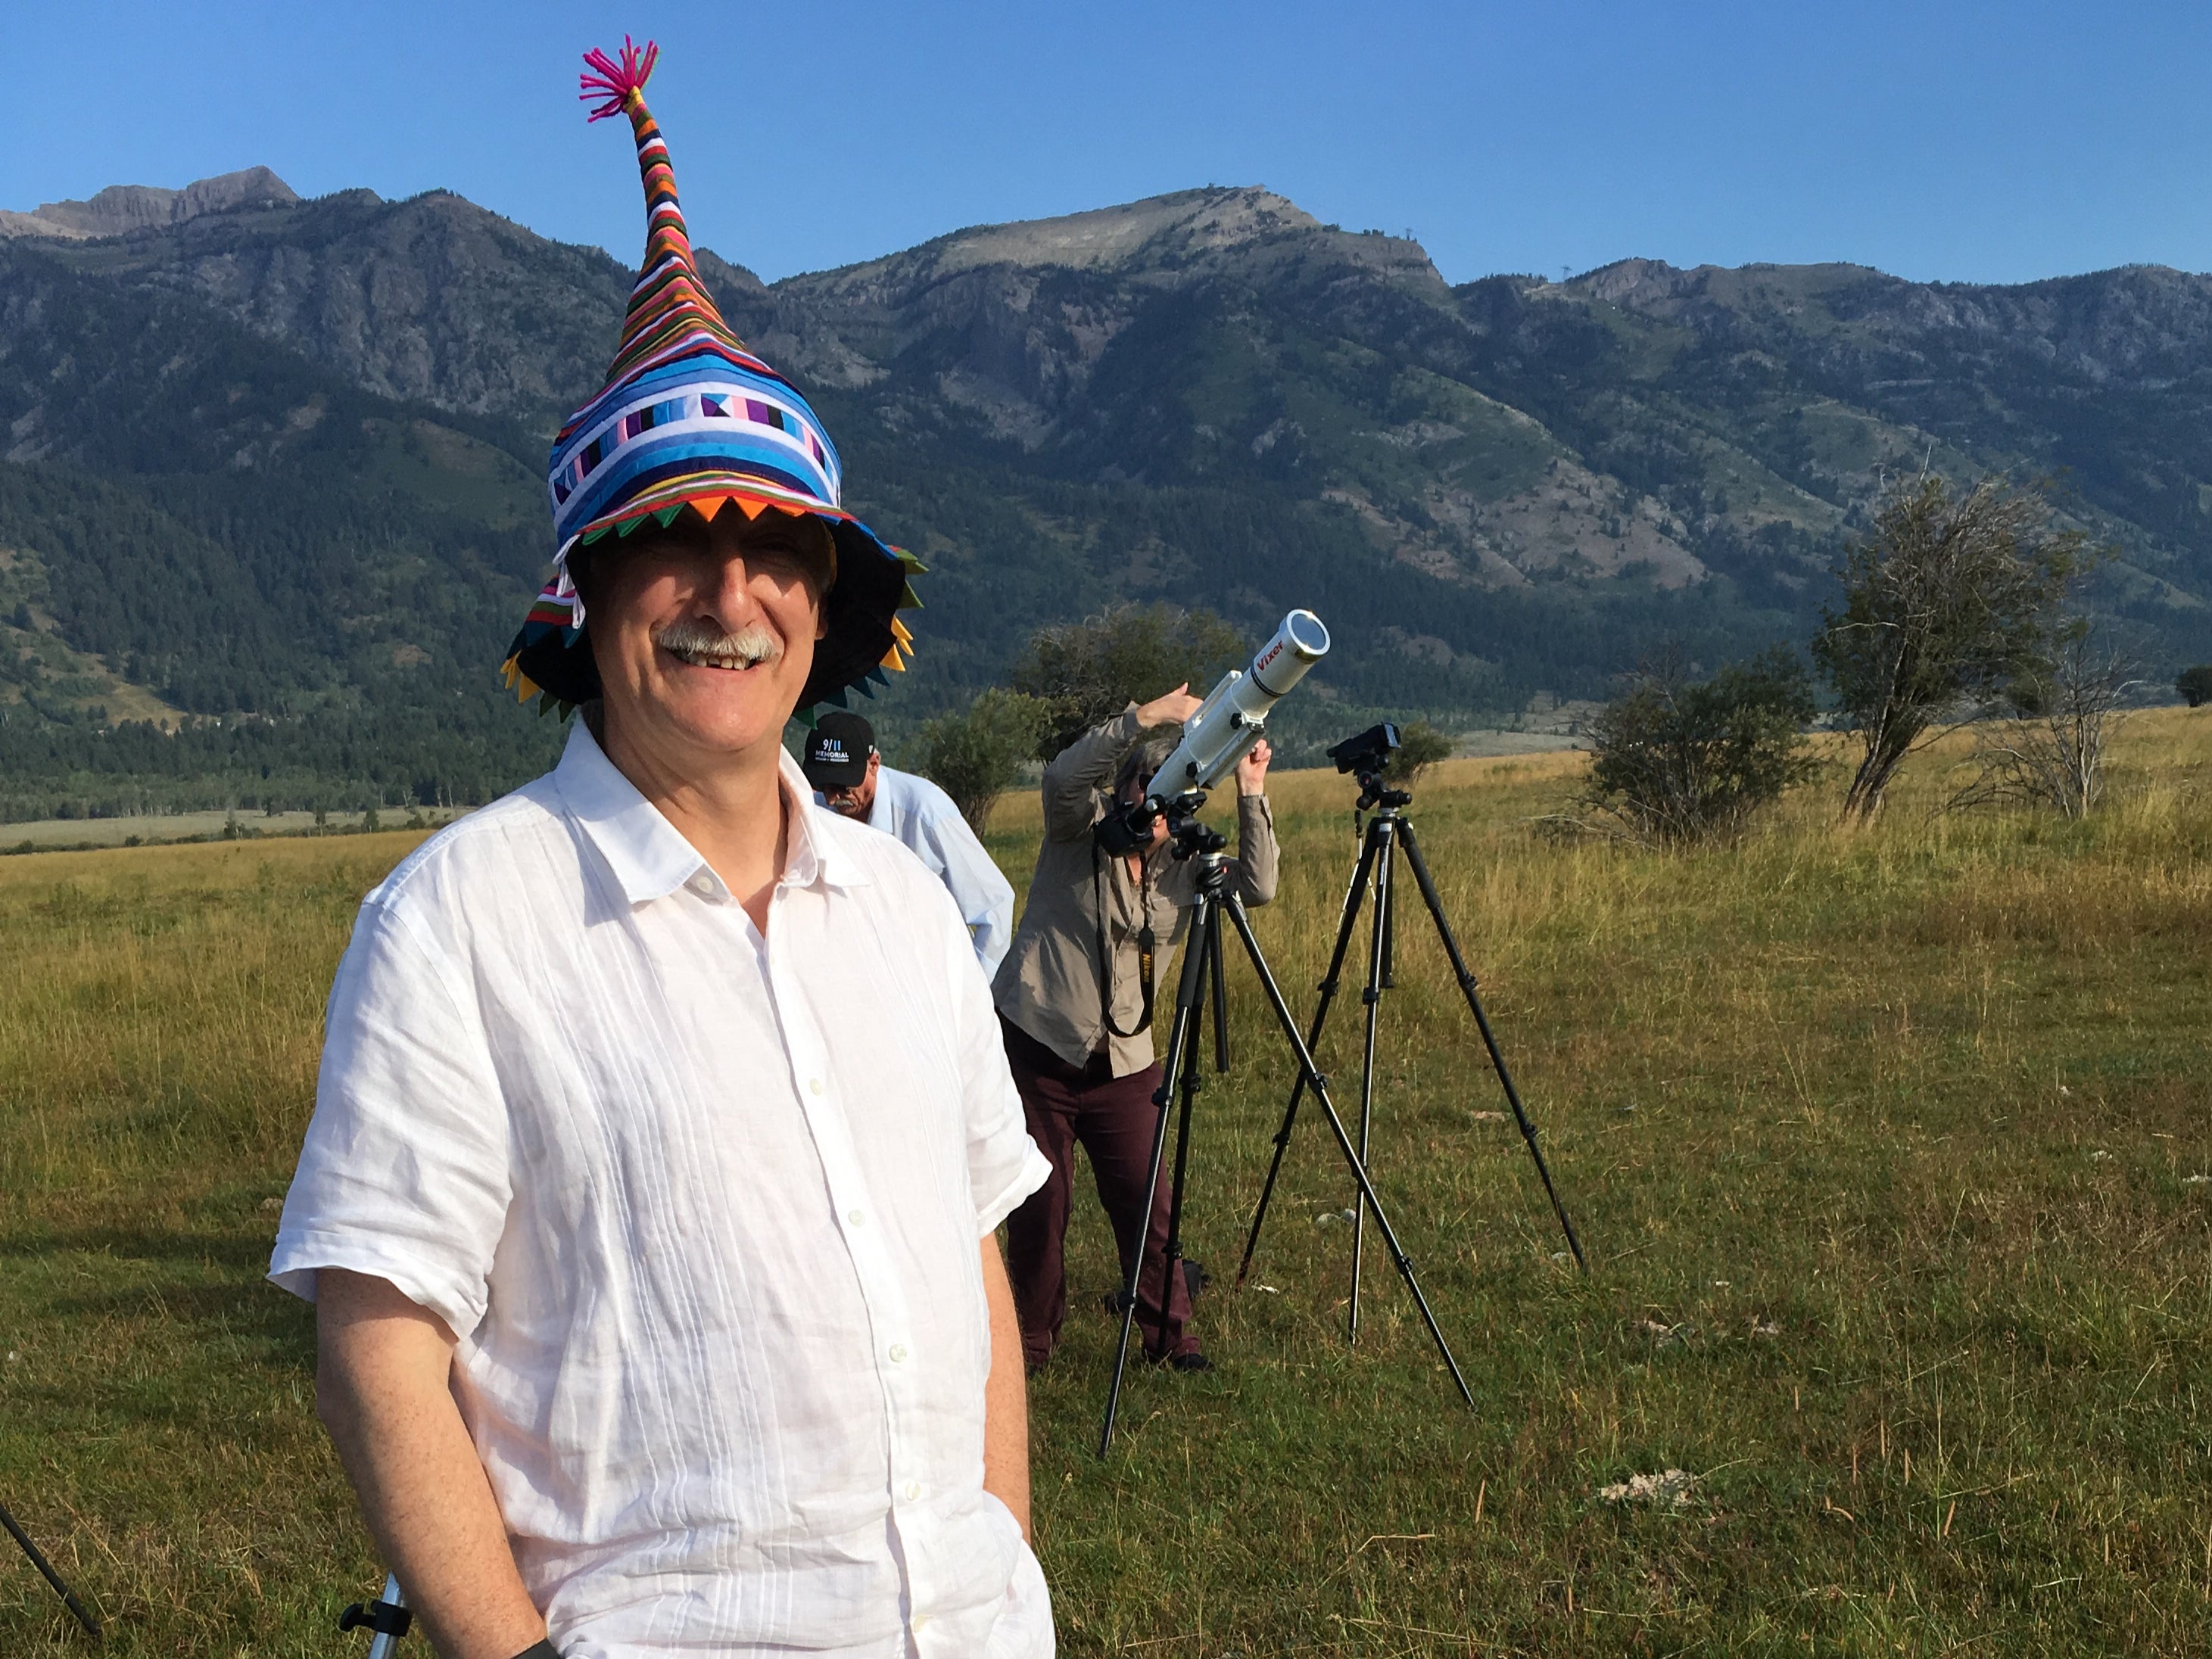 Star guest: Dr John Mason, astronomer and eclipse guru, in Wyoming in 2017 – awaiting that year’s total solar eclipse